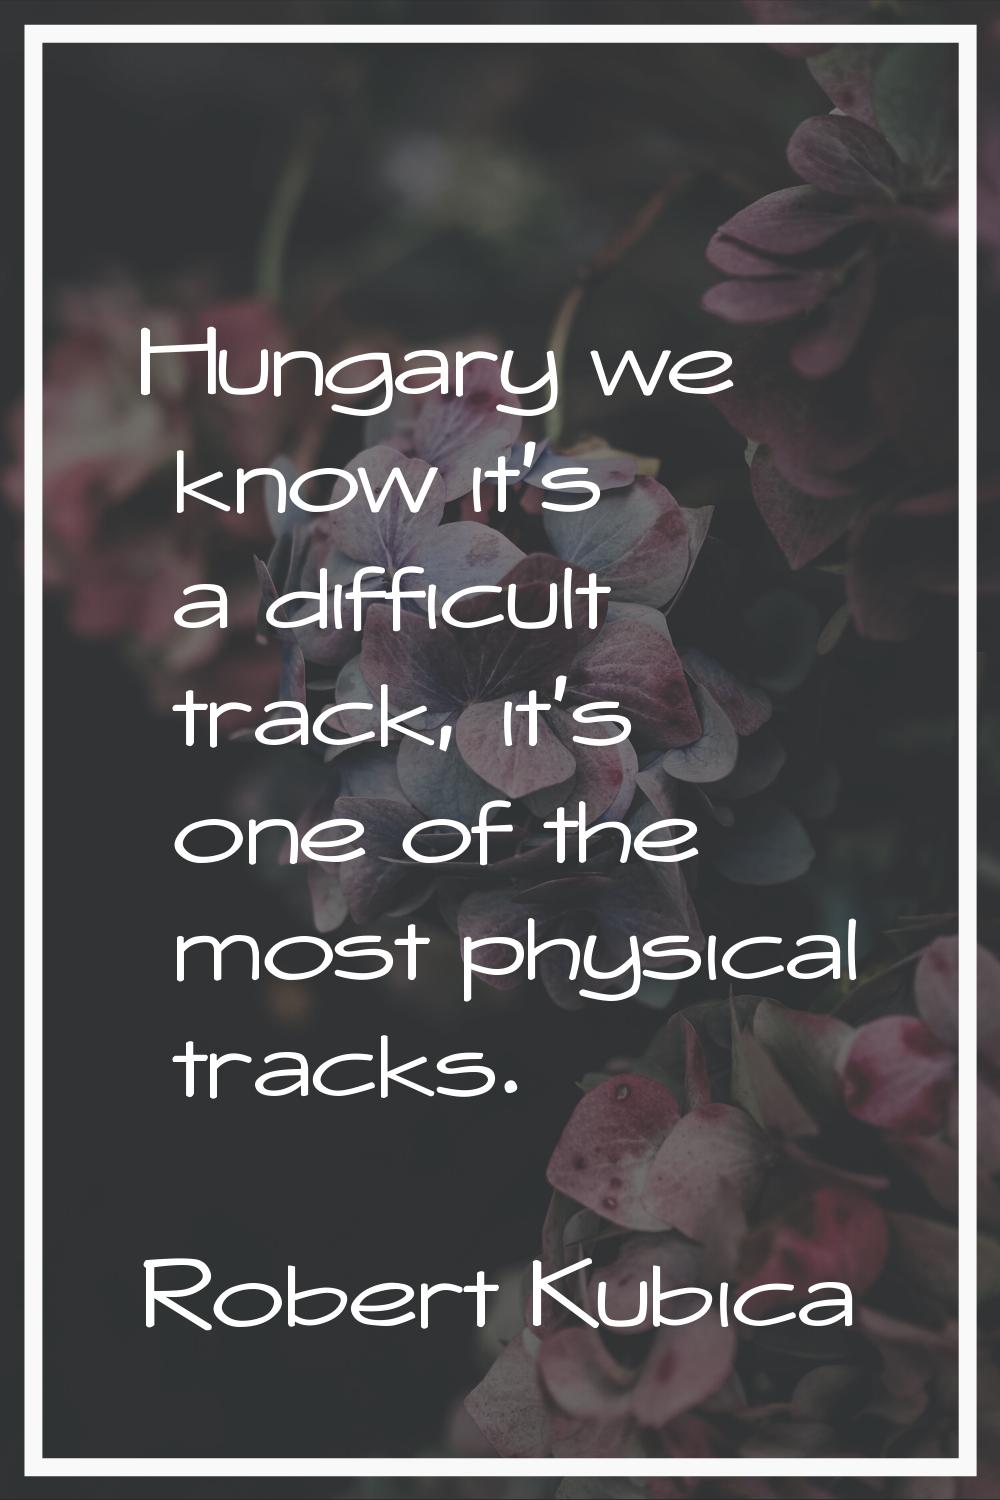 Hungary we know it's a difficult track, it's one of the most physical tracks.